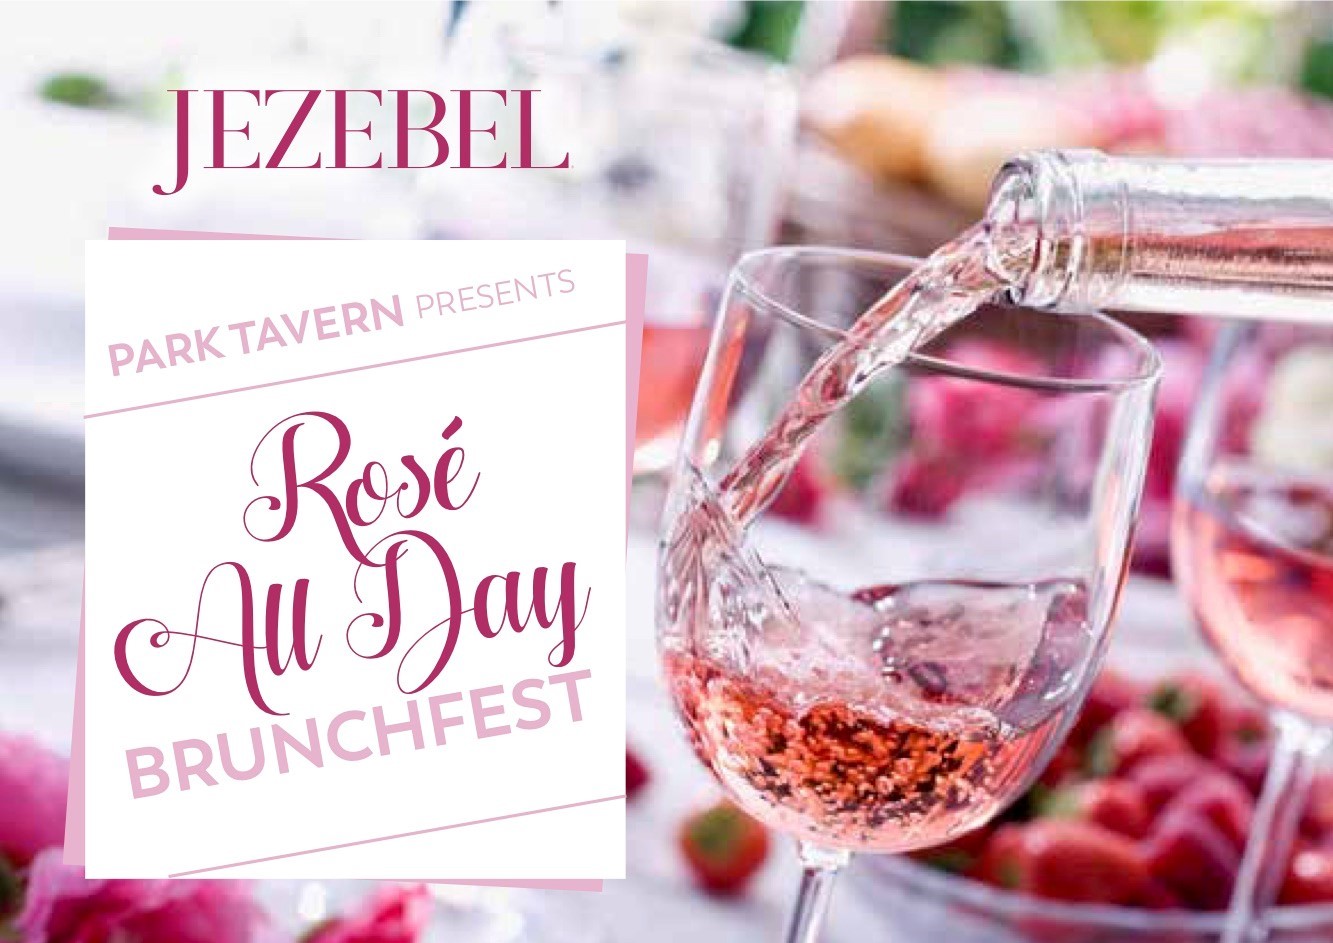 All-Day Rosé Brunchfest at Park Tavern Hosted by JEZEBEL Magazine’s Most Eligible